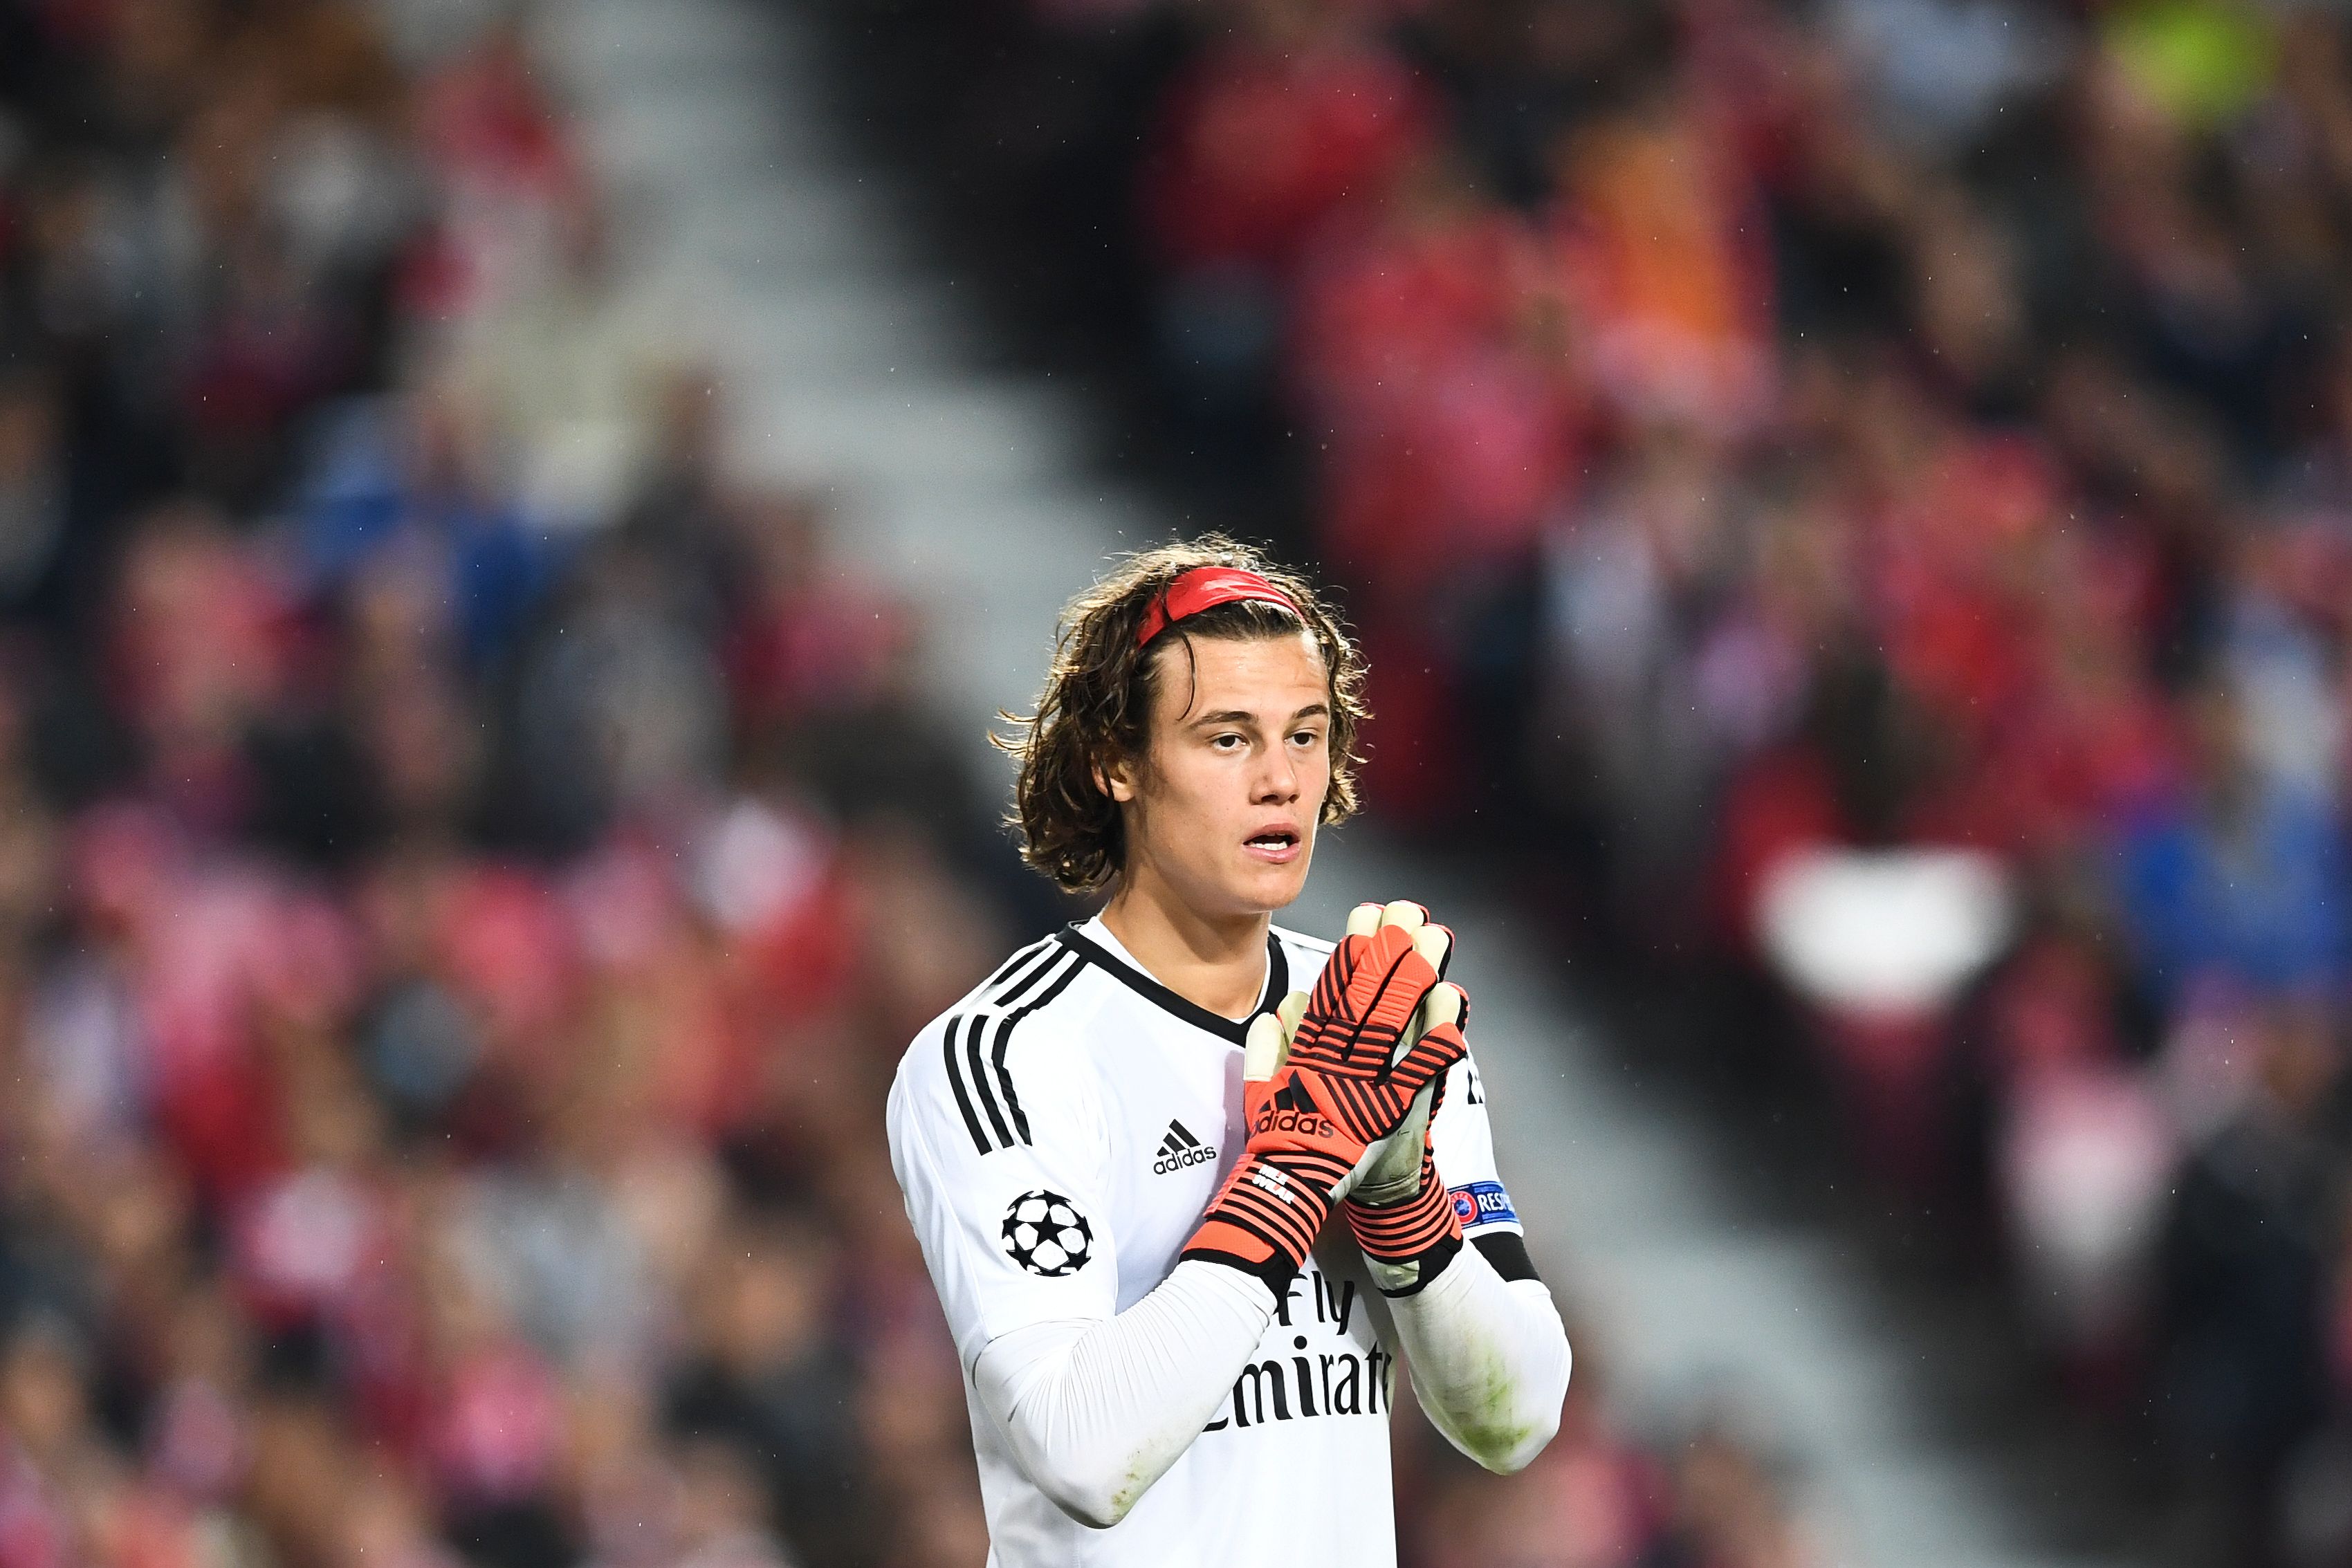 Manchester City contemplating a potential swoop for Mile Svilar